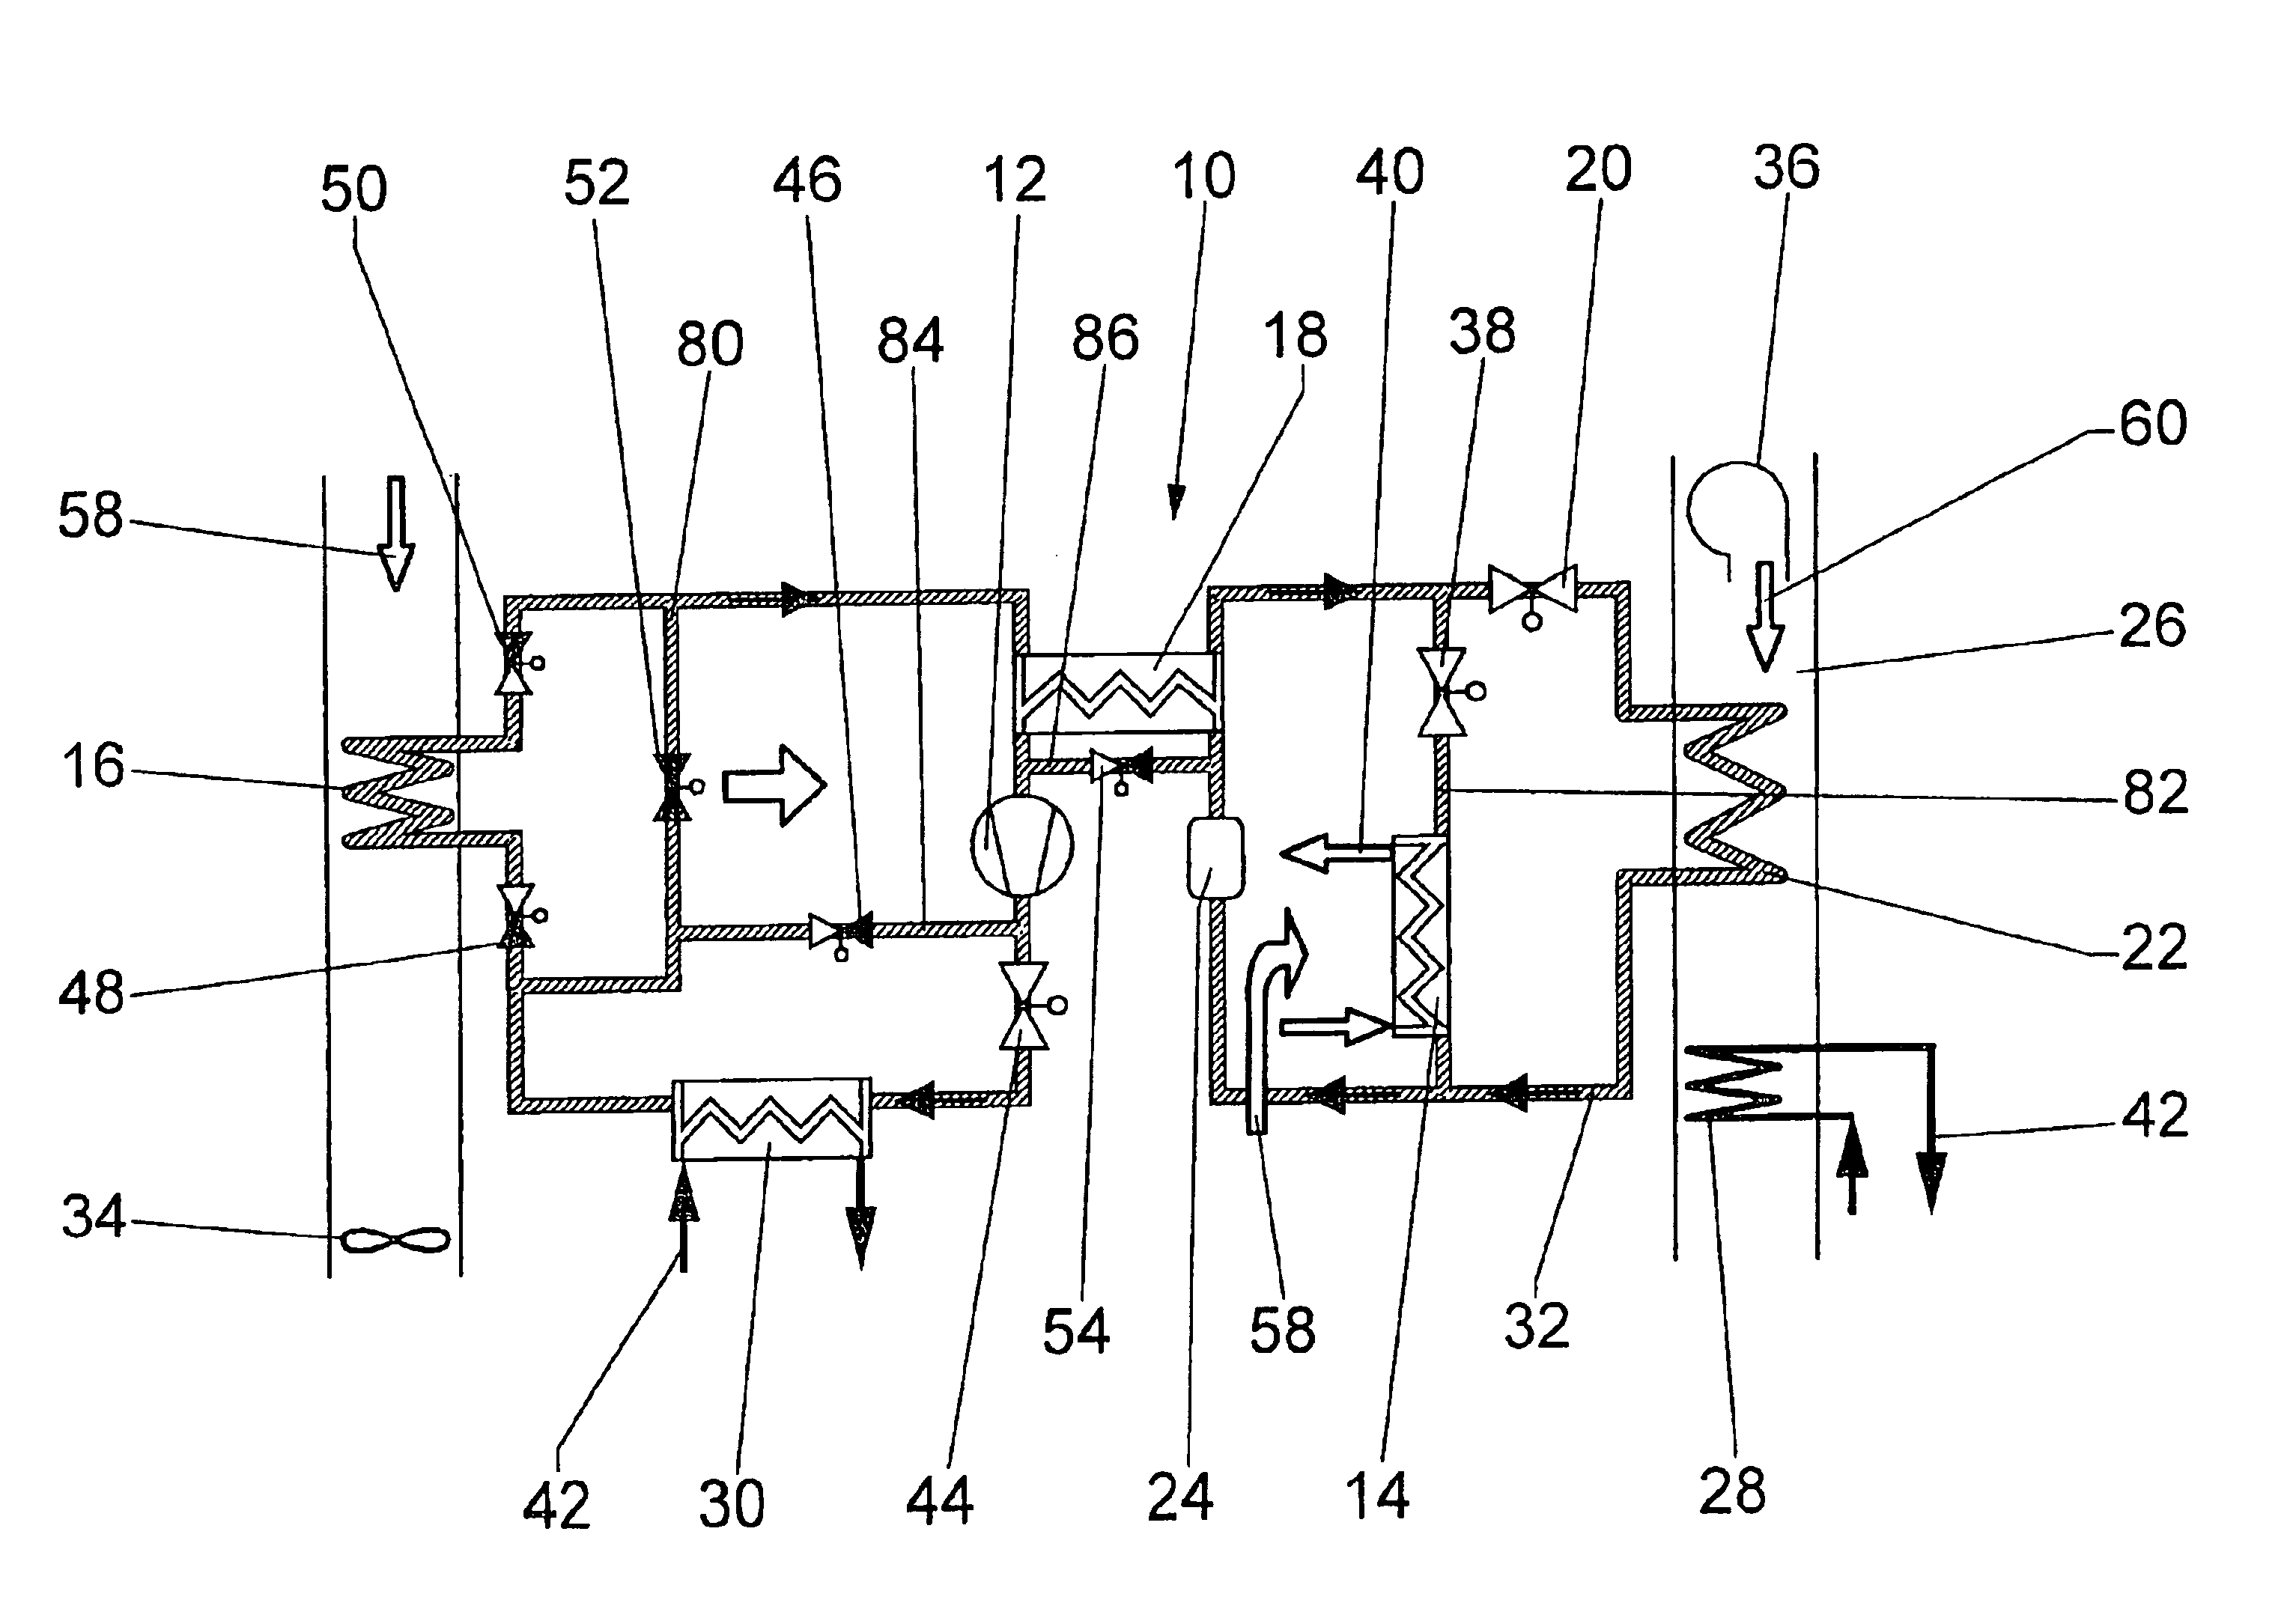 Air-conditioning unit with additional heat transfer unit in the refrigerant circuit